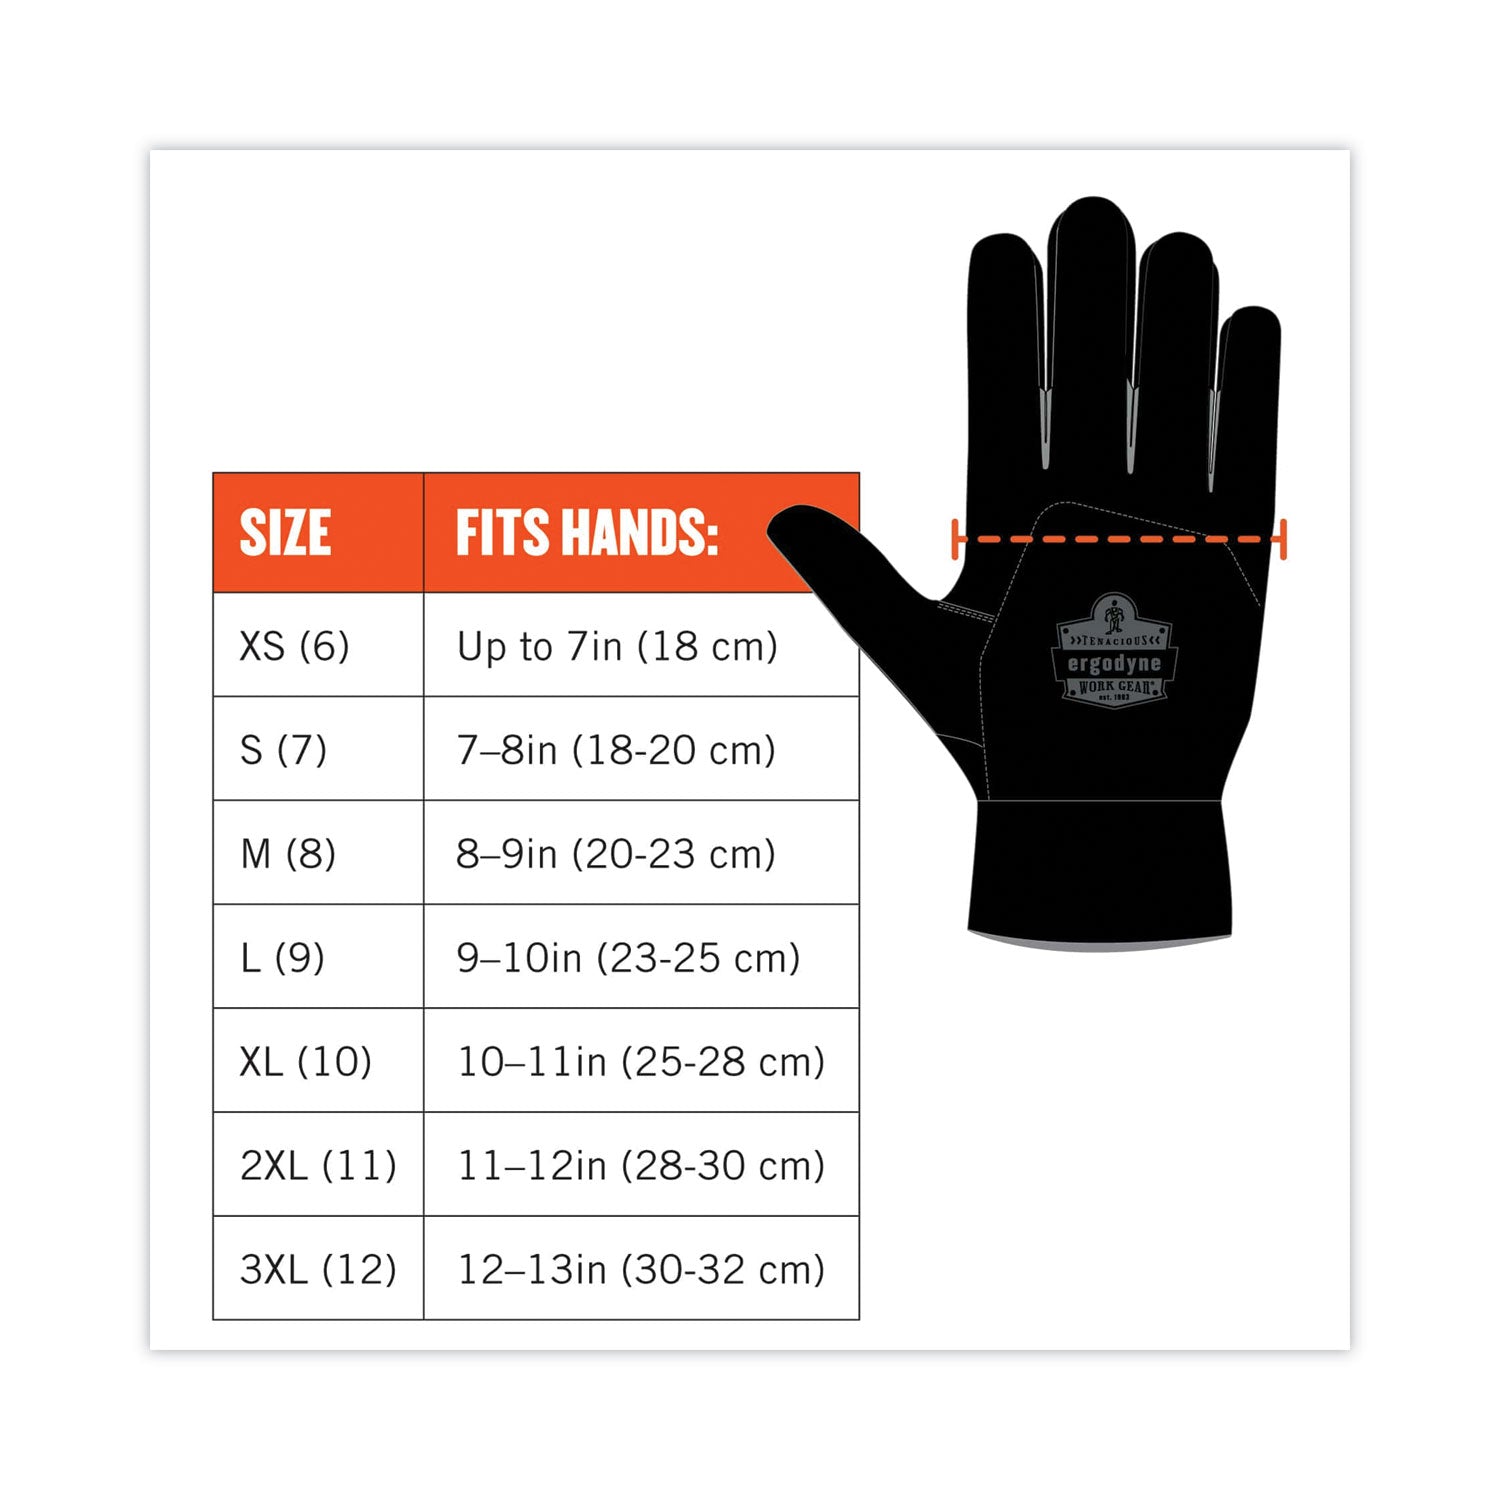 proflex-710-heavy-duty-mechanics-gloves-gray-small-pair-ships-in-1-3-business-days_ego17042 - 6